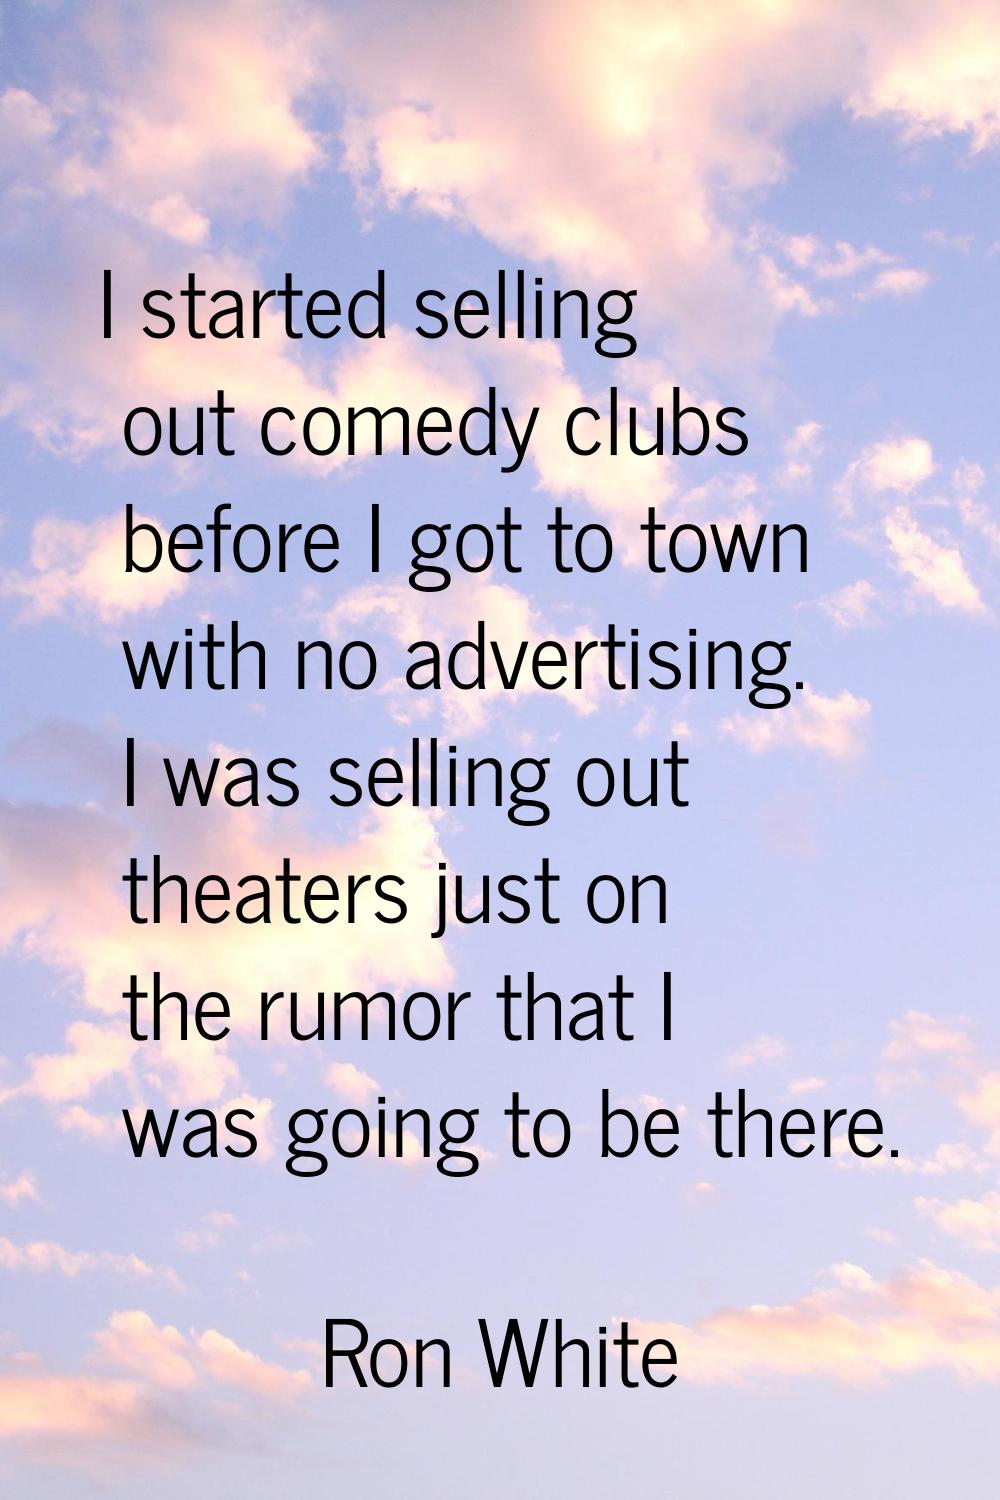 I started selling out comedy clubs before I got to town with no advertising. I was selling out thea